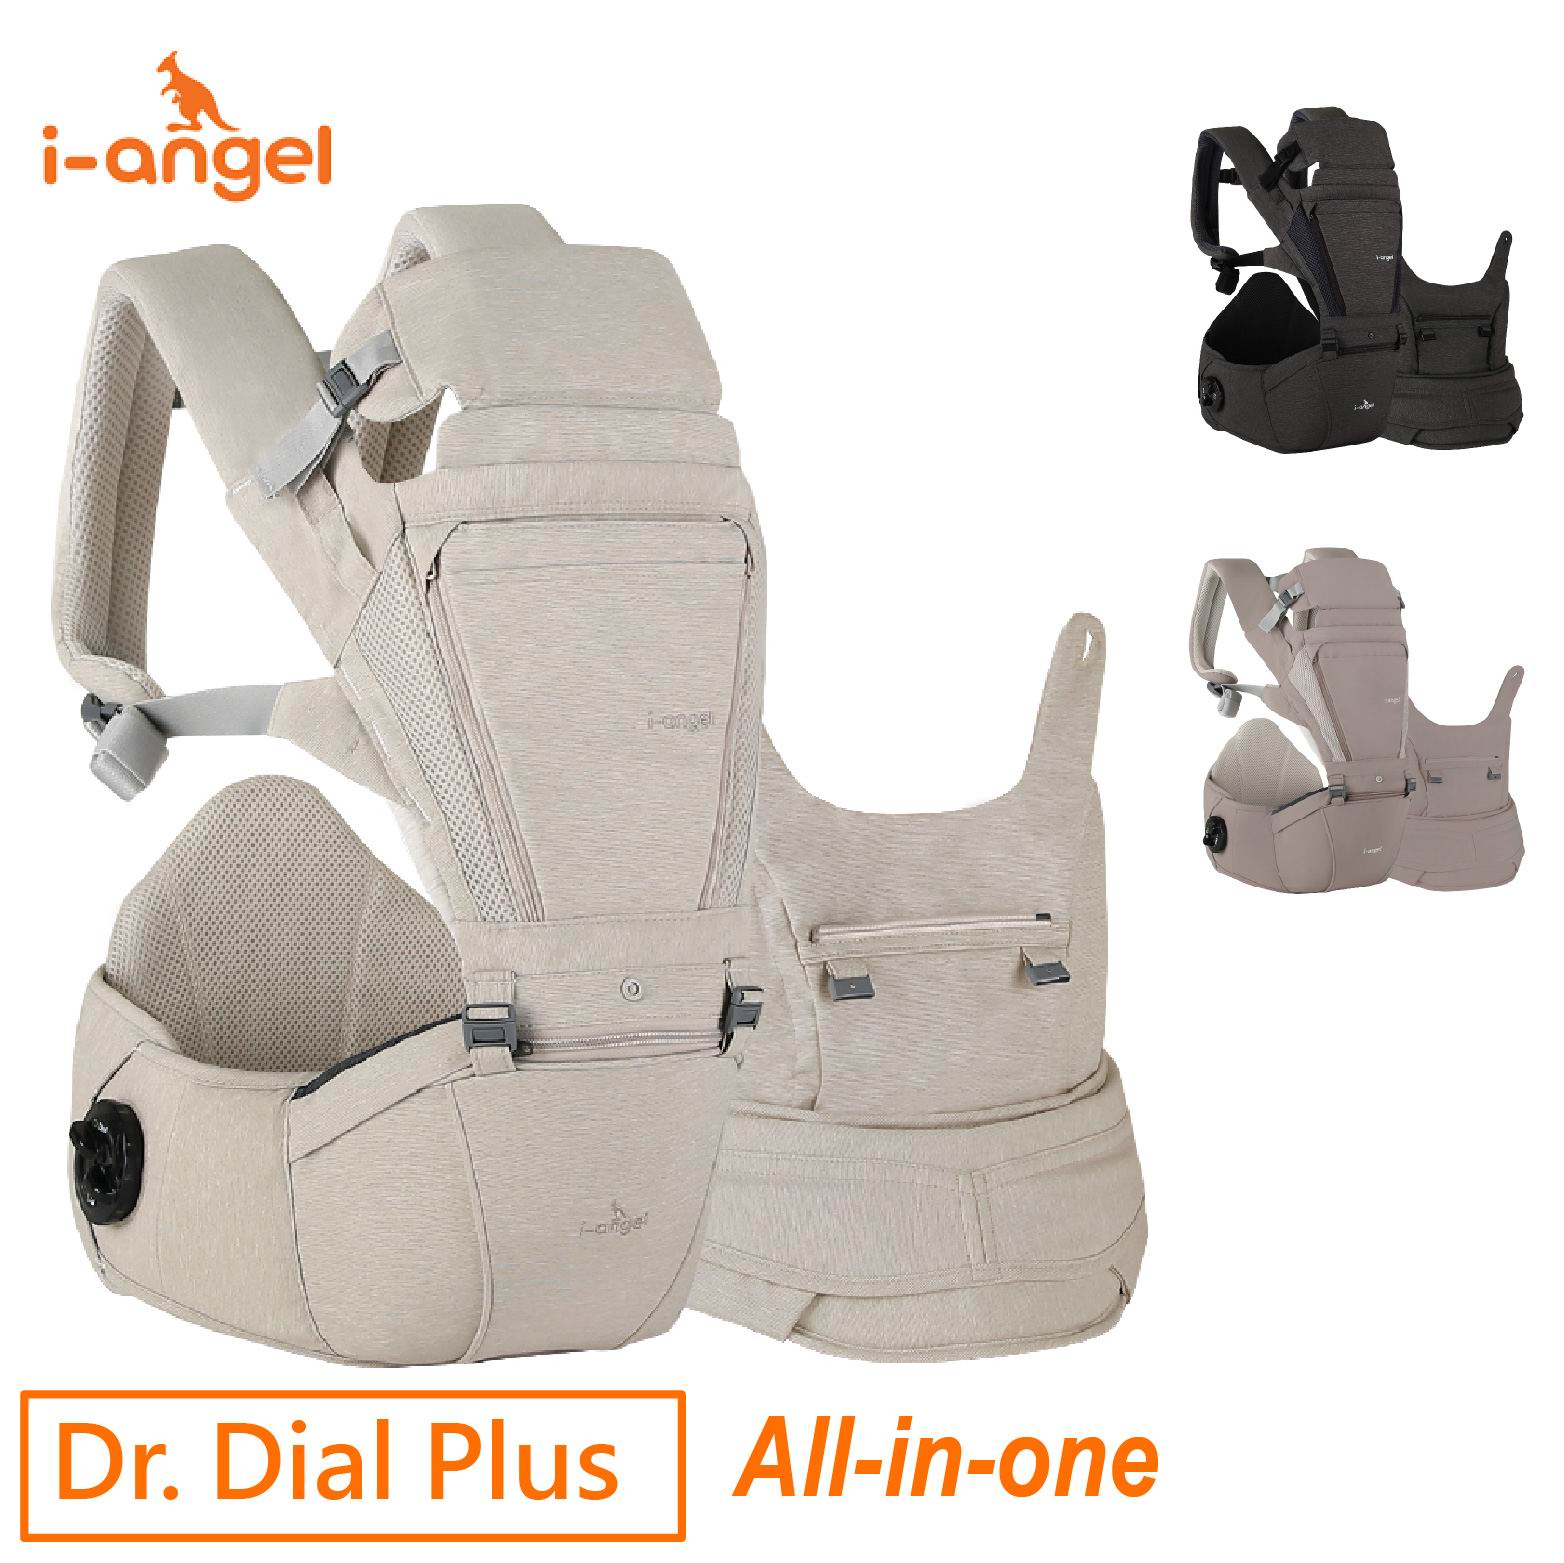 i-angel Dr. Dial Plus All-in-one 腰櫈揹帶